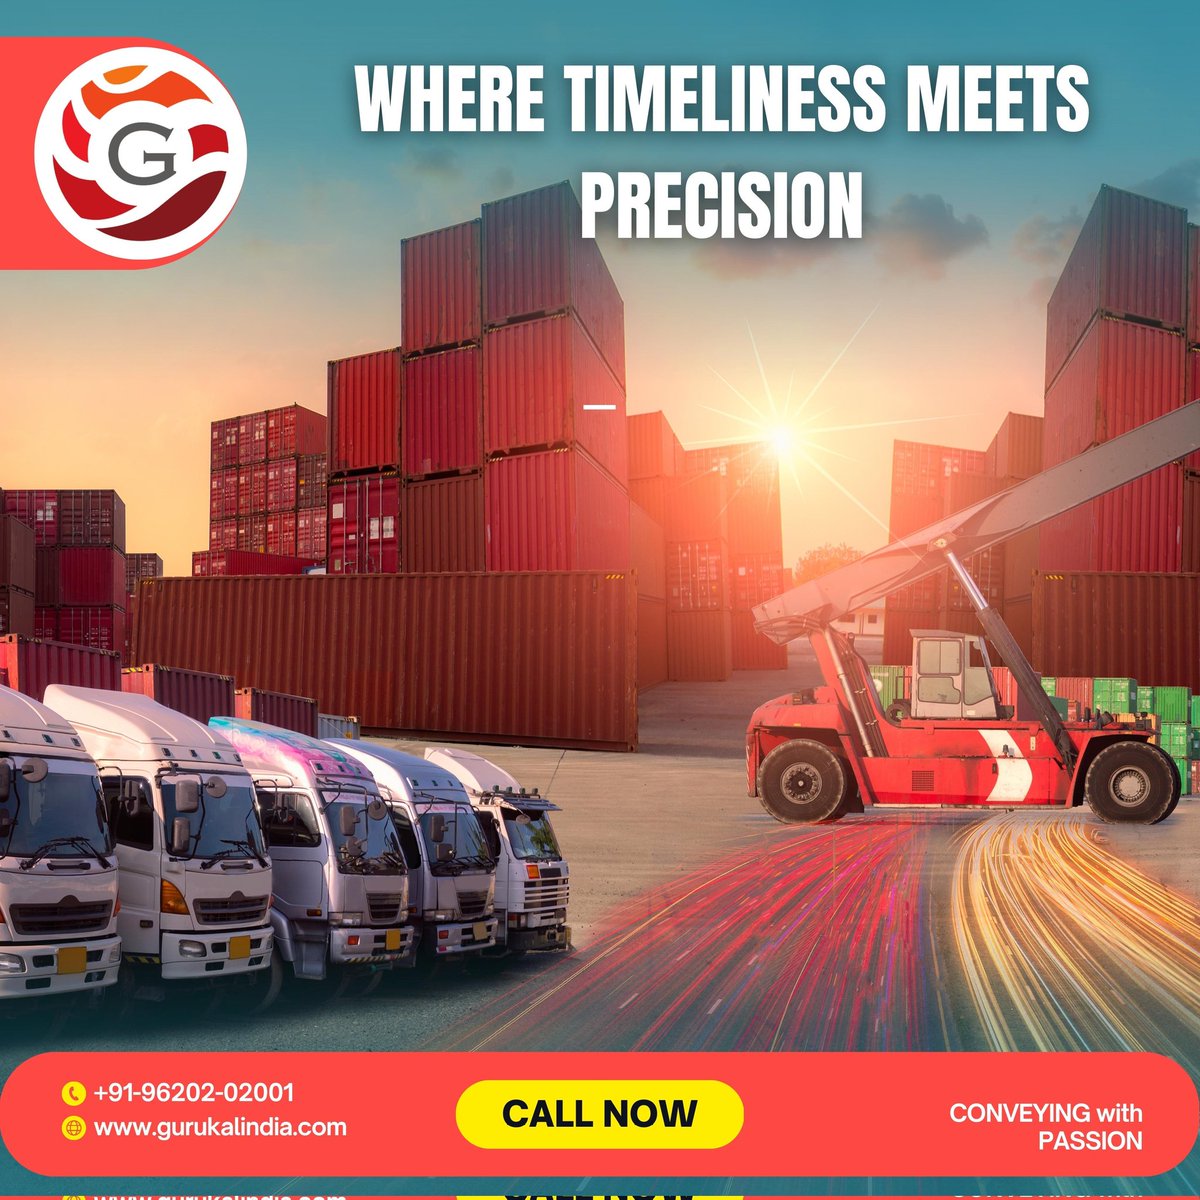 Where timeliness meets precision.
.
.
.
#logistics #transport #transportation #trucking #shipping #supplychain #freight #cargo #logisticscompany #delivery #truck #business #trucks #logisticsmanagement #export #warehouse #import #logistica #truckdriver #warehousing